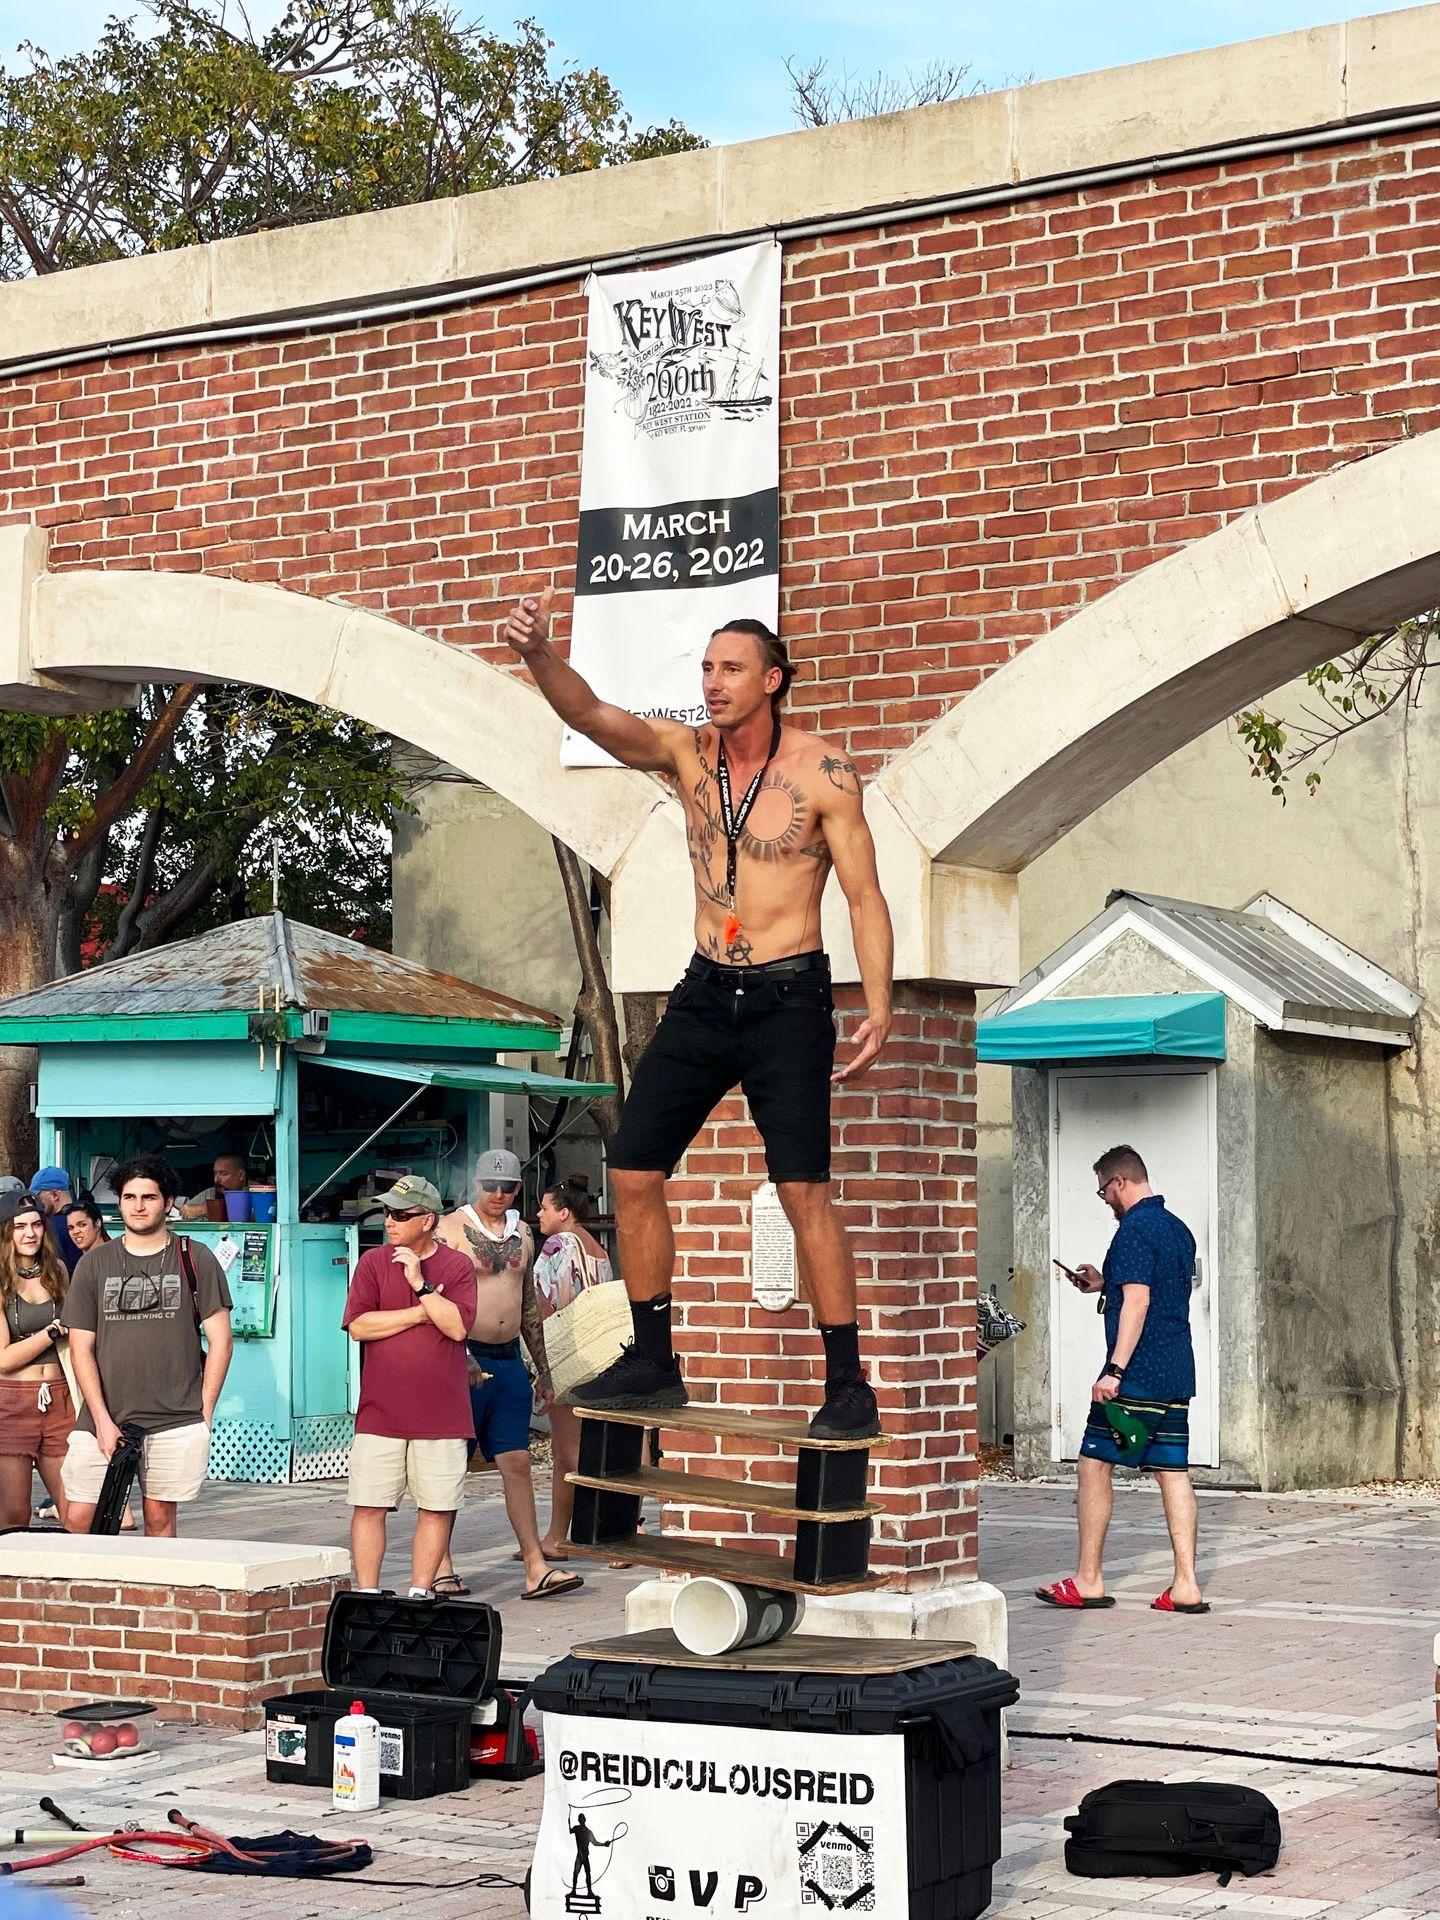 A street performer balancing on a wooden board on top of a cylinder. The man is shirtless with chest tattoos